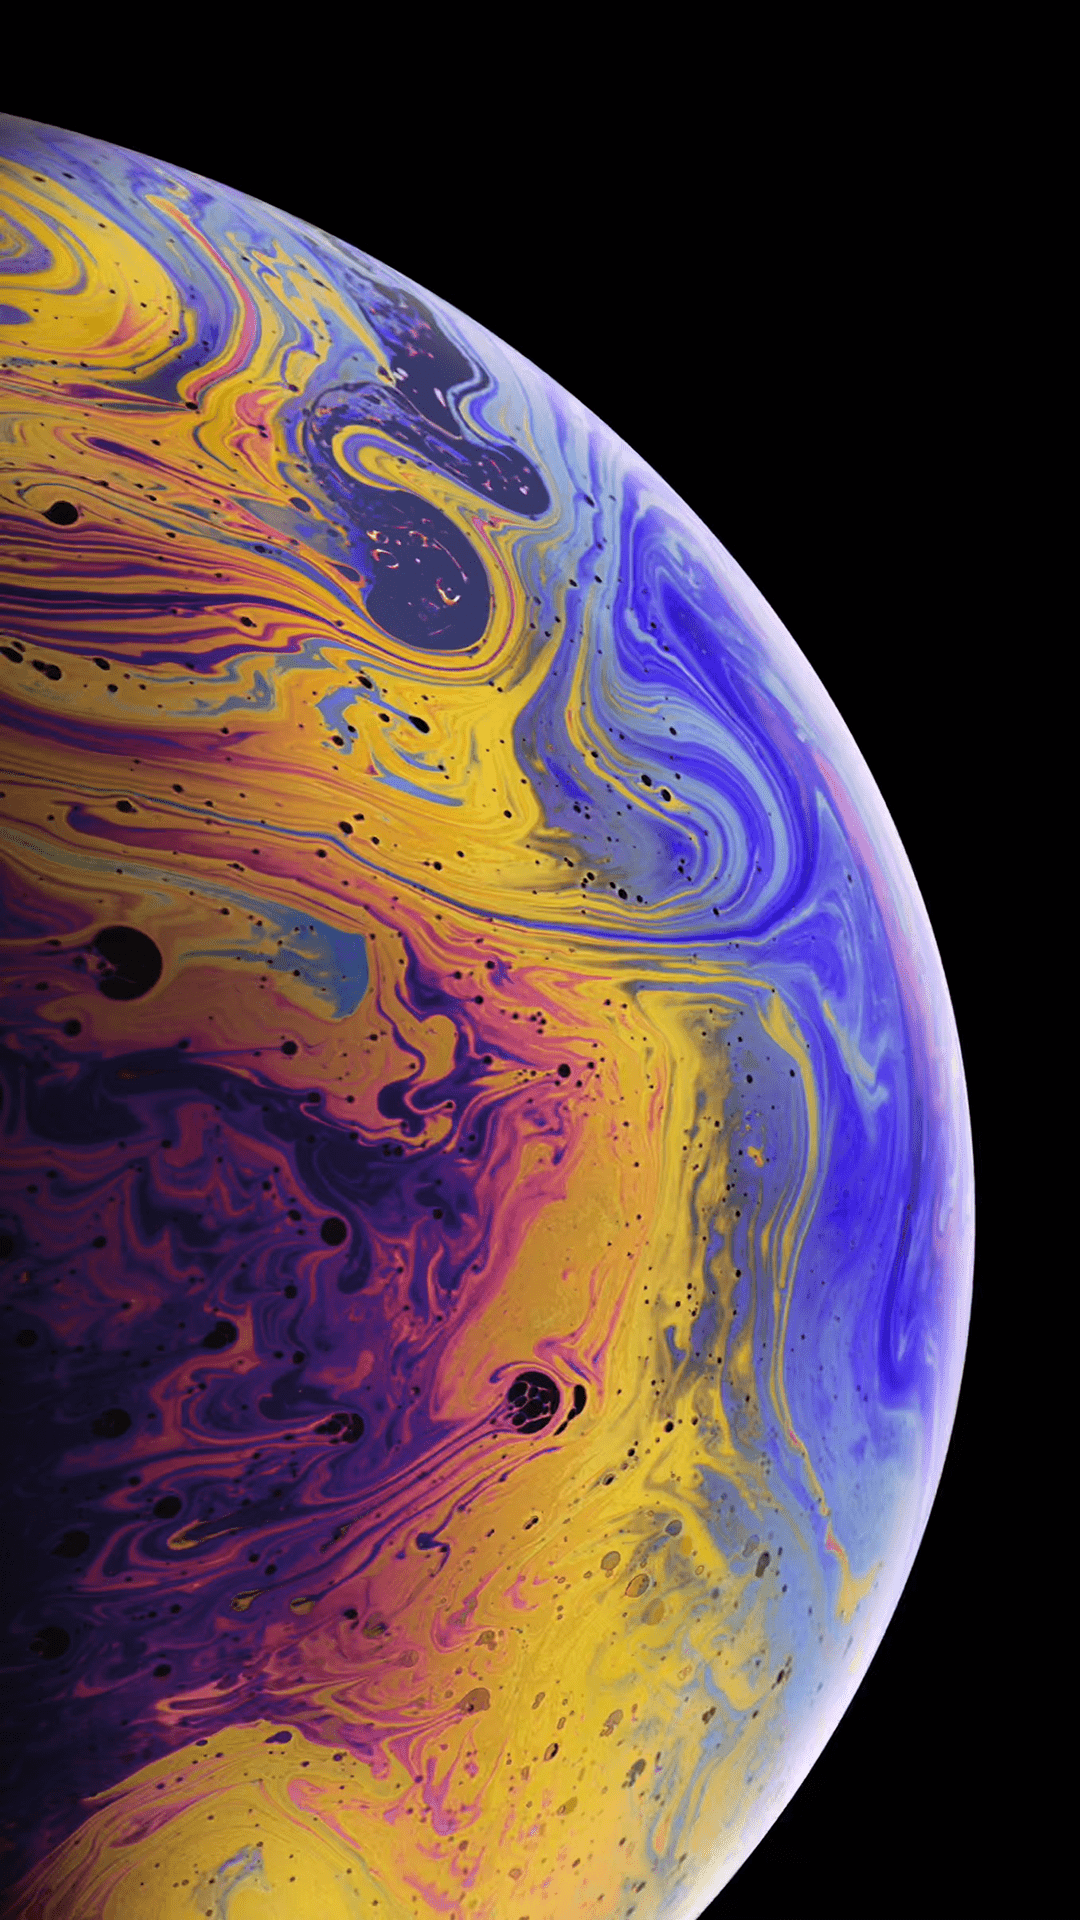 IPhone XS Max wallpaper with high-resolution 1242x2688 pixel. You can use this wallpaper for your iPhone 8, iPhone 7, iPhone 6, iPhone SE, iPhone XS, iPhone XR, iPhone 11, and other mobile devices - Earth